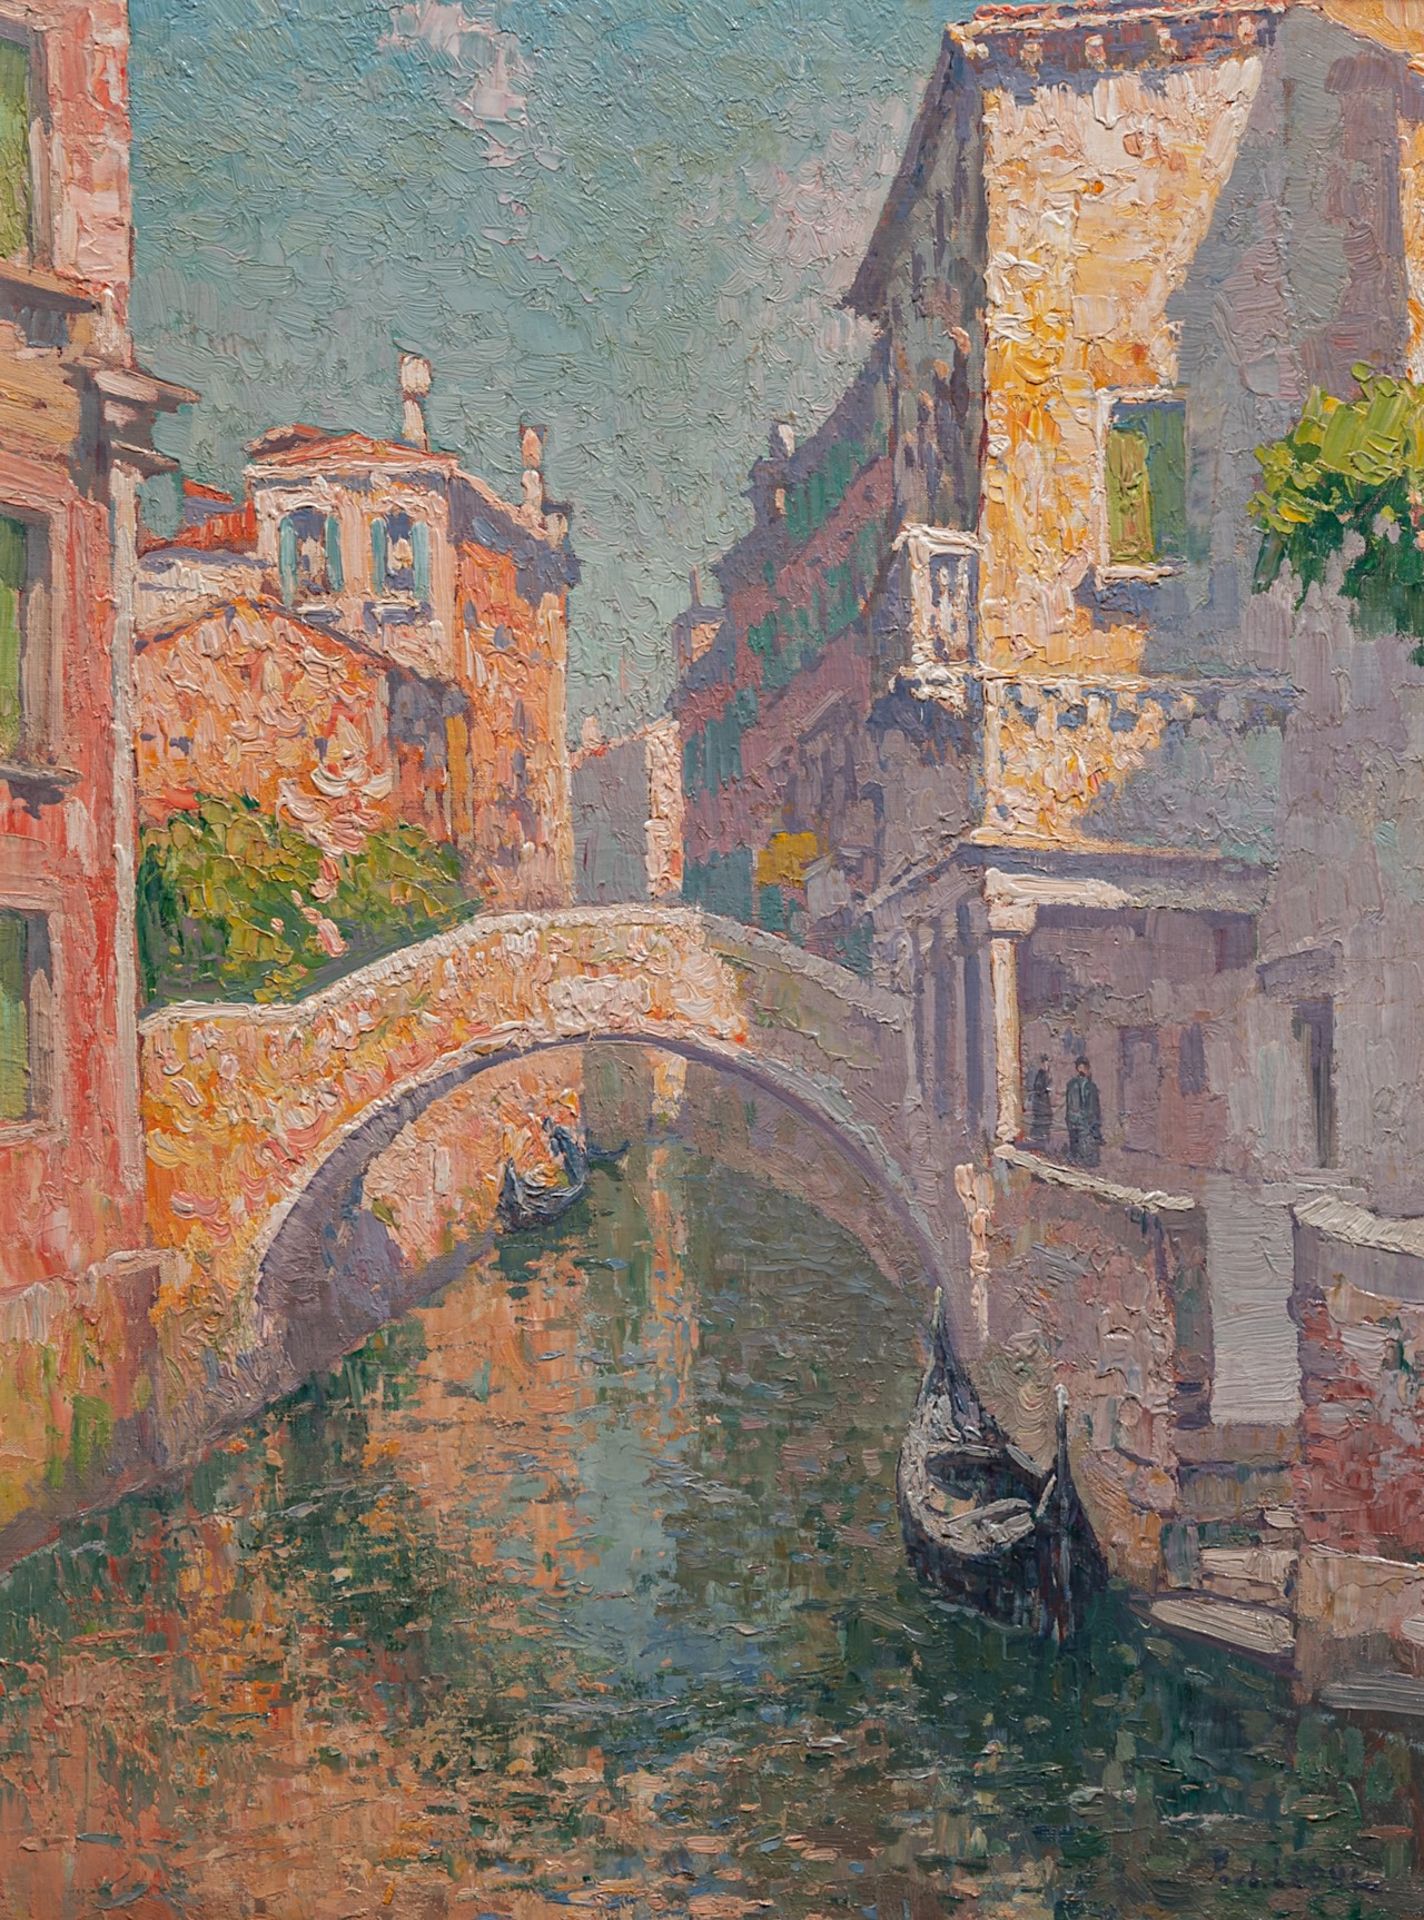 Paul Leduc (1876-1943), view of Venice, oil on canvas 60 x 45 cm. (23.6 x 17.7 in.), Frame: 75 x 60